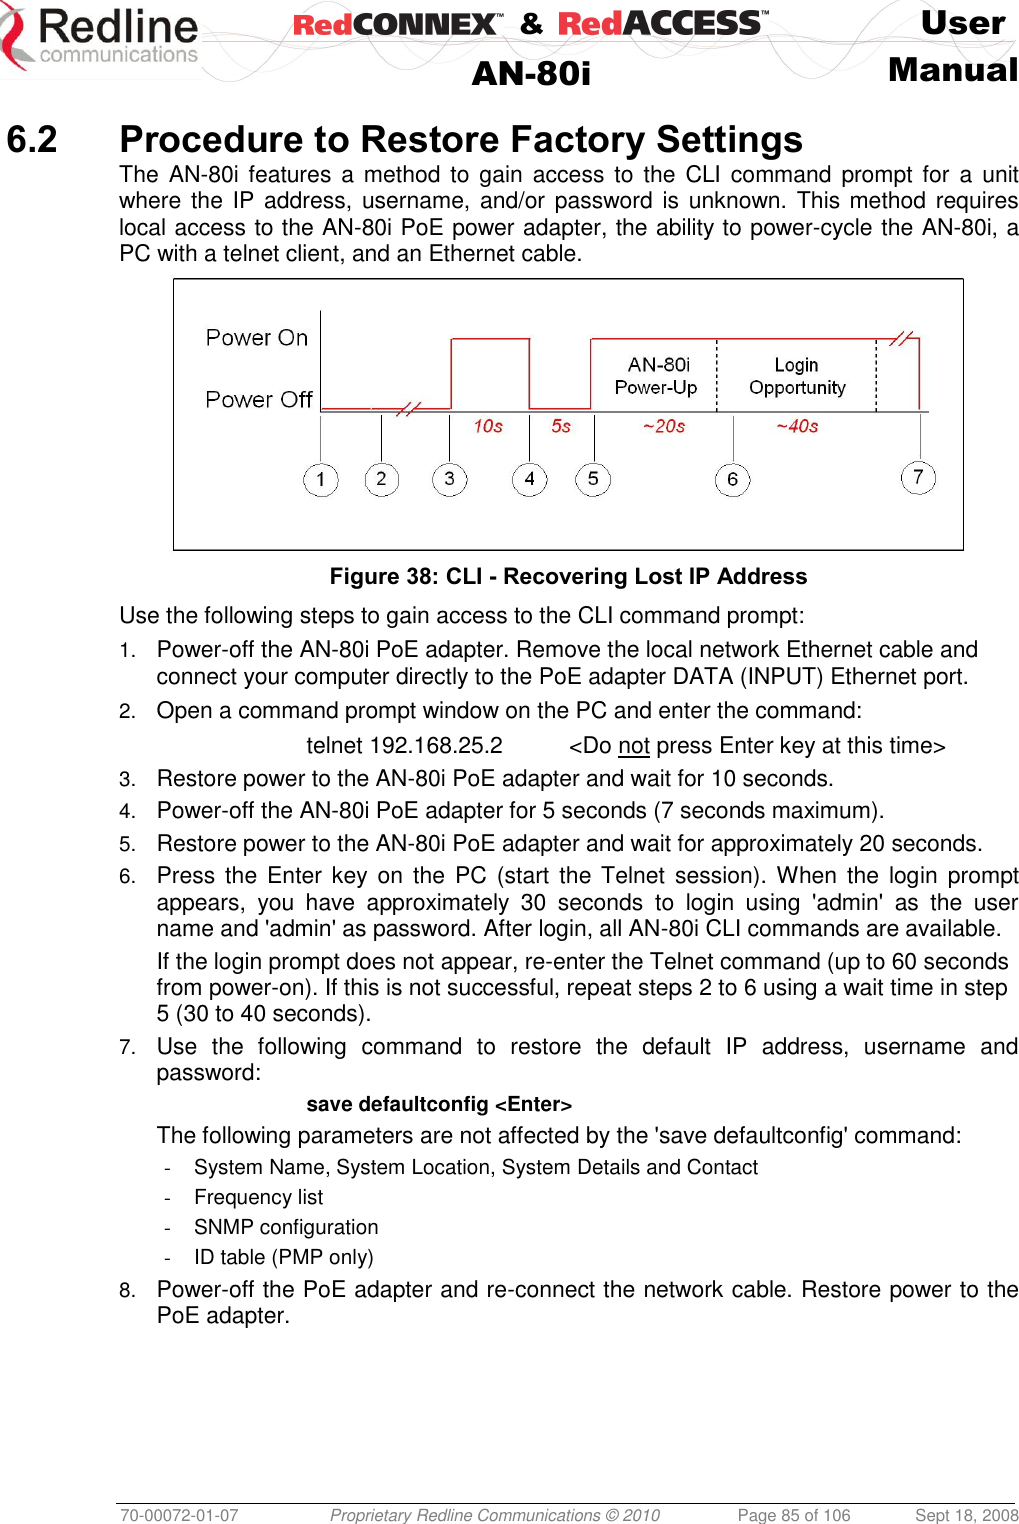    &amp;  User  AN-80i Manual  70-00072-01-07 Proprietary Redline Communications © 2010  Page 85 of 106  Sept 18, 2008  6.2 Procedure to Restore Factory Settings The  AN-80i features a method  to gain access to the CLI  command prompt  for  a  unit where the  IP address, username, and/or  password is unknown. This method requires local access to the AN-80i PoE power adapter, the ability to power-cycle the AN-80i, a PC with a telnet client, and an Ethernet cable.   Figure 38: CLI - Recovering Lost IP Address Use the following steps to gain access to the CLI command prompt: 1. Power-off the AN-80i PoE adapter. Remove the local network Ethernet cable and connect your computer directly to the PoE adapter DATA (INPUT) Ethernet port. 2. Open a command prompt window on the PC and enter the command:   telnet 192.168.25.2  &lt;Do not press Enter key at this time&gt; 3. Restore power to the AN-80i PoE adapter and wait for 10 seconds. 4. Power-off the AN-80i PoE adapter for 5 seconds (7 seconds maximum). 5. Restore power to the AN-80i PoE adapter and wait for approximately 20 seconds. 6. Press the Enter key on  the  PC  (start  the Telnet  session). When  the  login prompt appears,  you  have  approximately  30  seconds  to  login  using  &apos;admin&apos;  as  the  user name and &apos;admin&apos; as password. After login, all AN-80i CLI commands are available. If the login prompt does not appear, re-enter the Telnet command (up to 60 seconds from power-on). If this is not successful, repeat steps 2 to 6 using a wait time in step 5 (30 to 40 seconds). 7. Use  the  following  command  to  restore  the  default  IP  address,  username  and password:   save defaultconfig &lt;Enter&gt; The following parameters are not affected by the &apos;save defaultconfig&apos; command:   -  System Name, System Location, System Details and Contact -  Frequency list -  SNMP configuration -  ID table (PMP only) 8. Power-off the PoE adapter and re-connect the network cable. Restore power to the PoE adapter.  